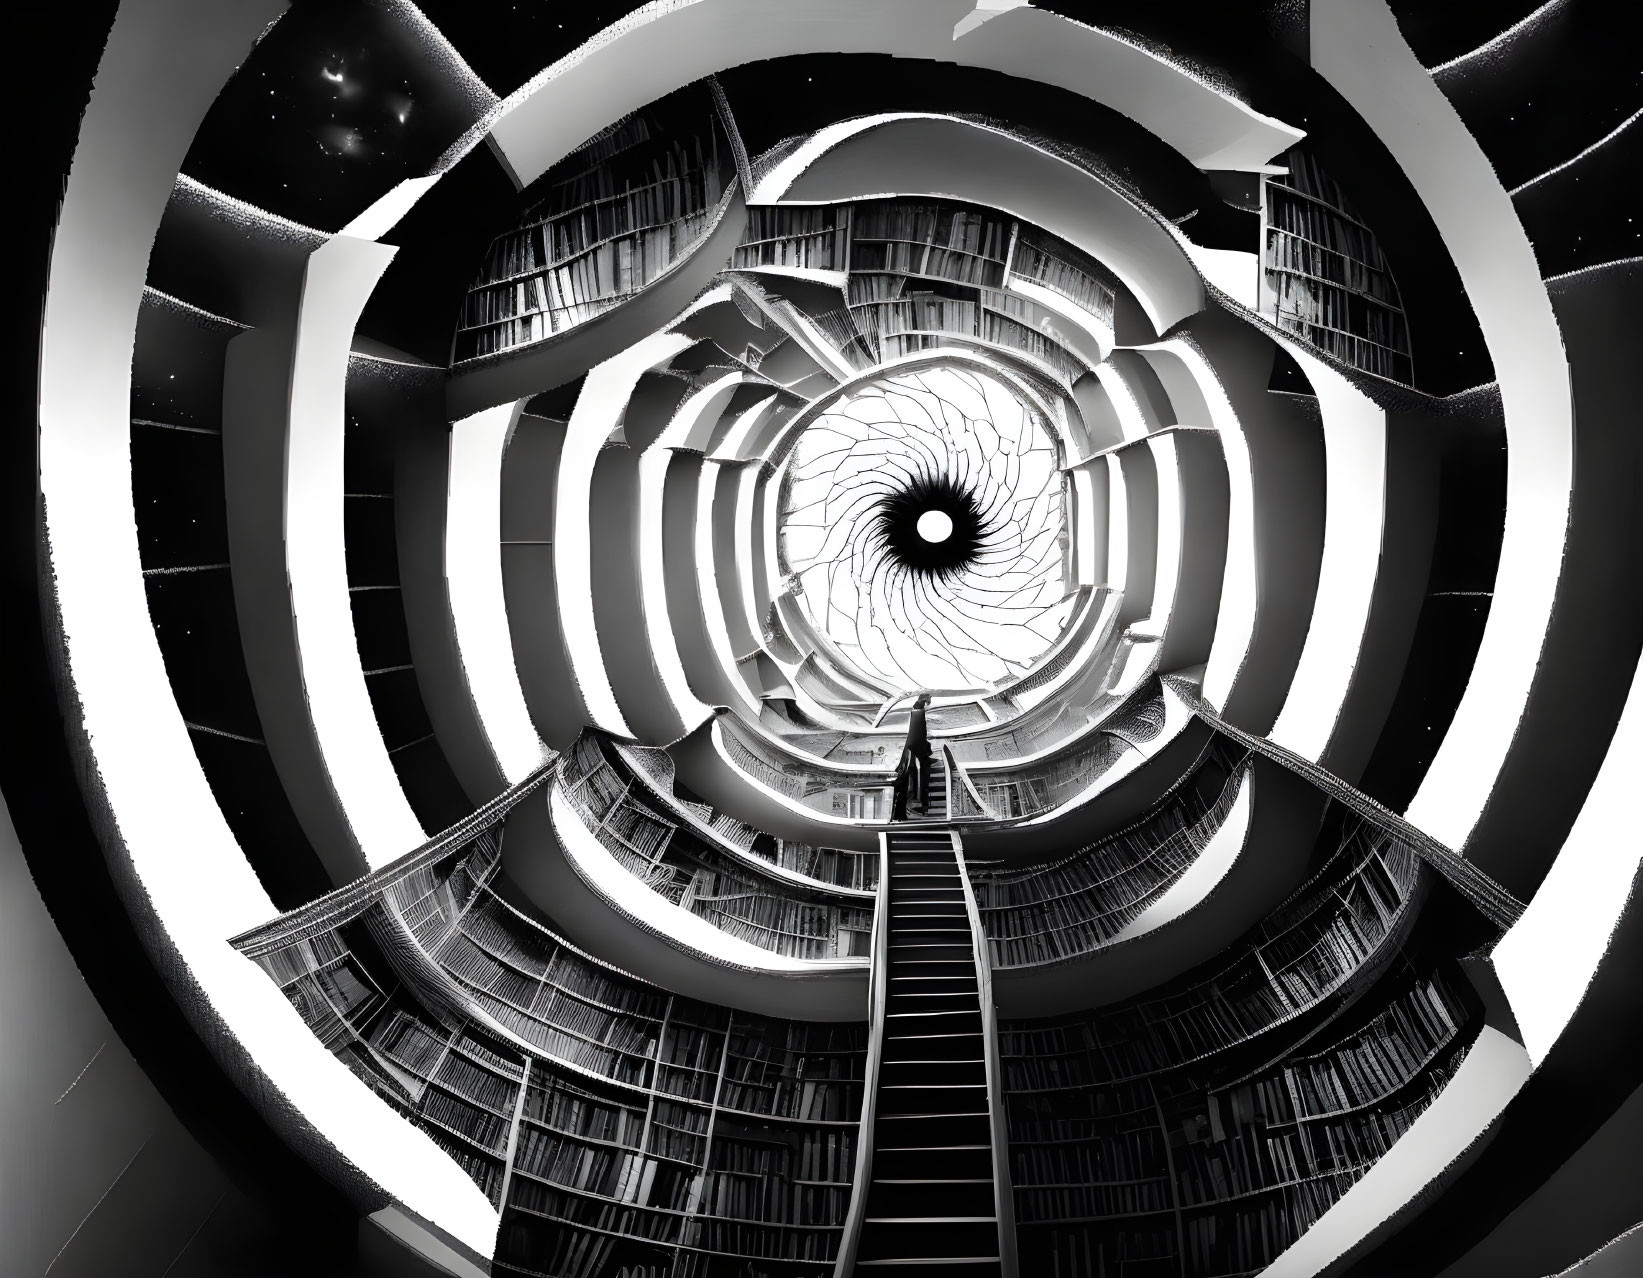 Surreal black and white spiral staircase with cosmic elements and bookshelves